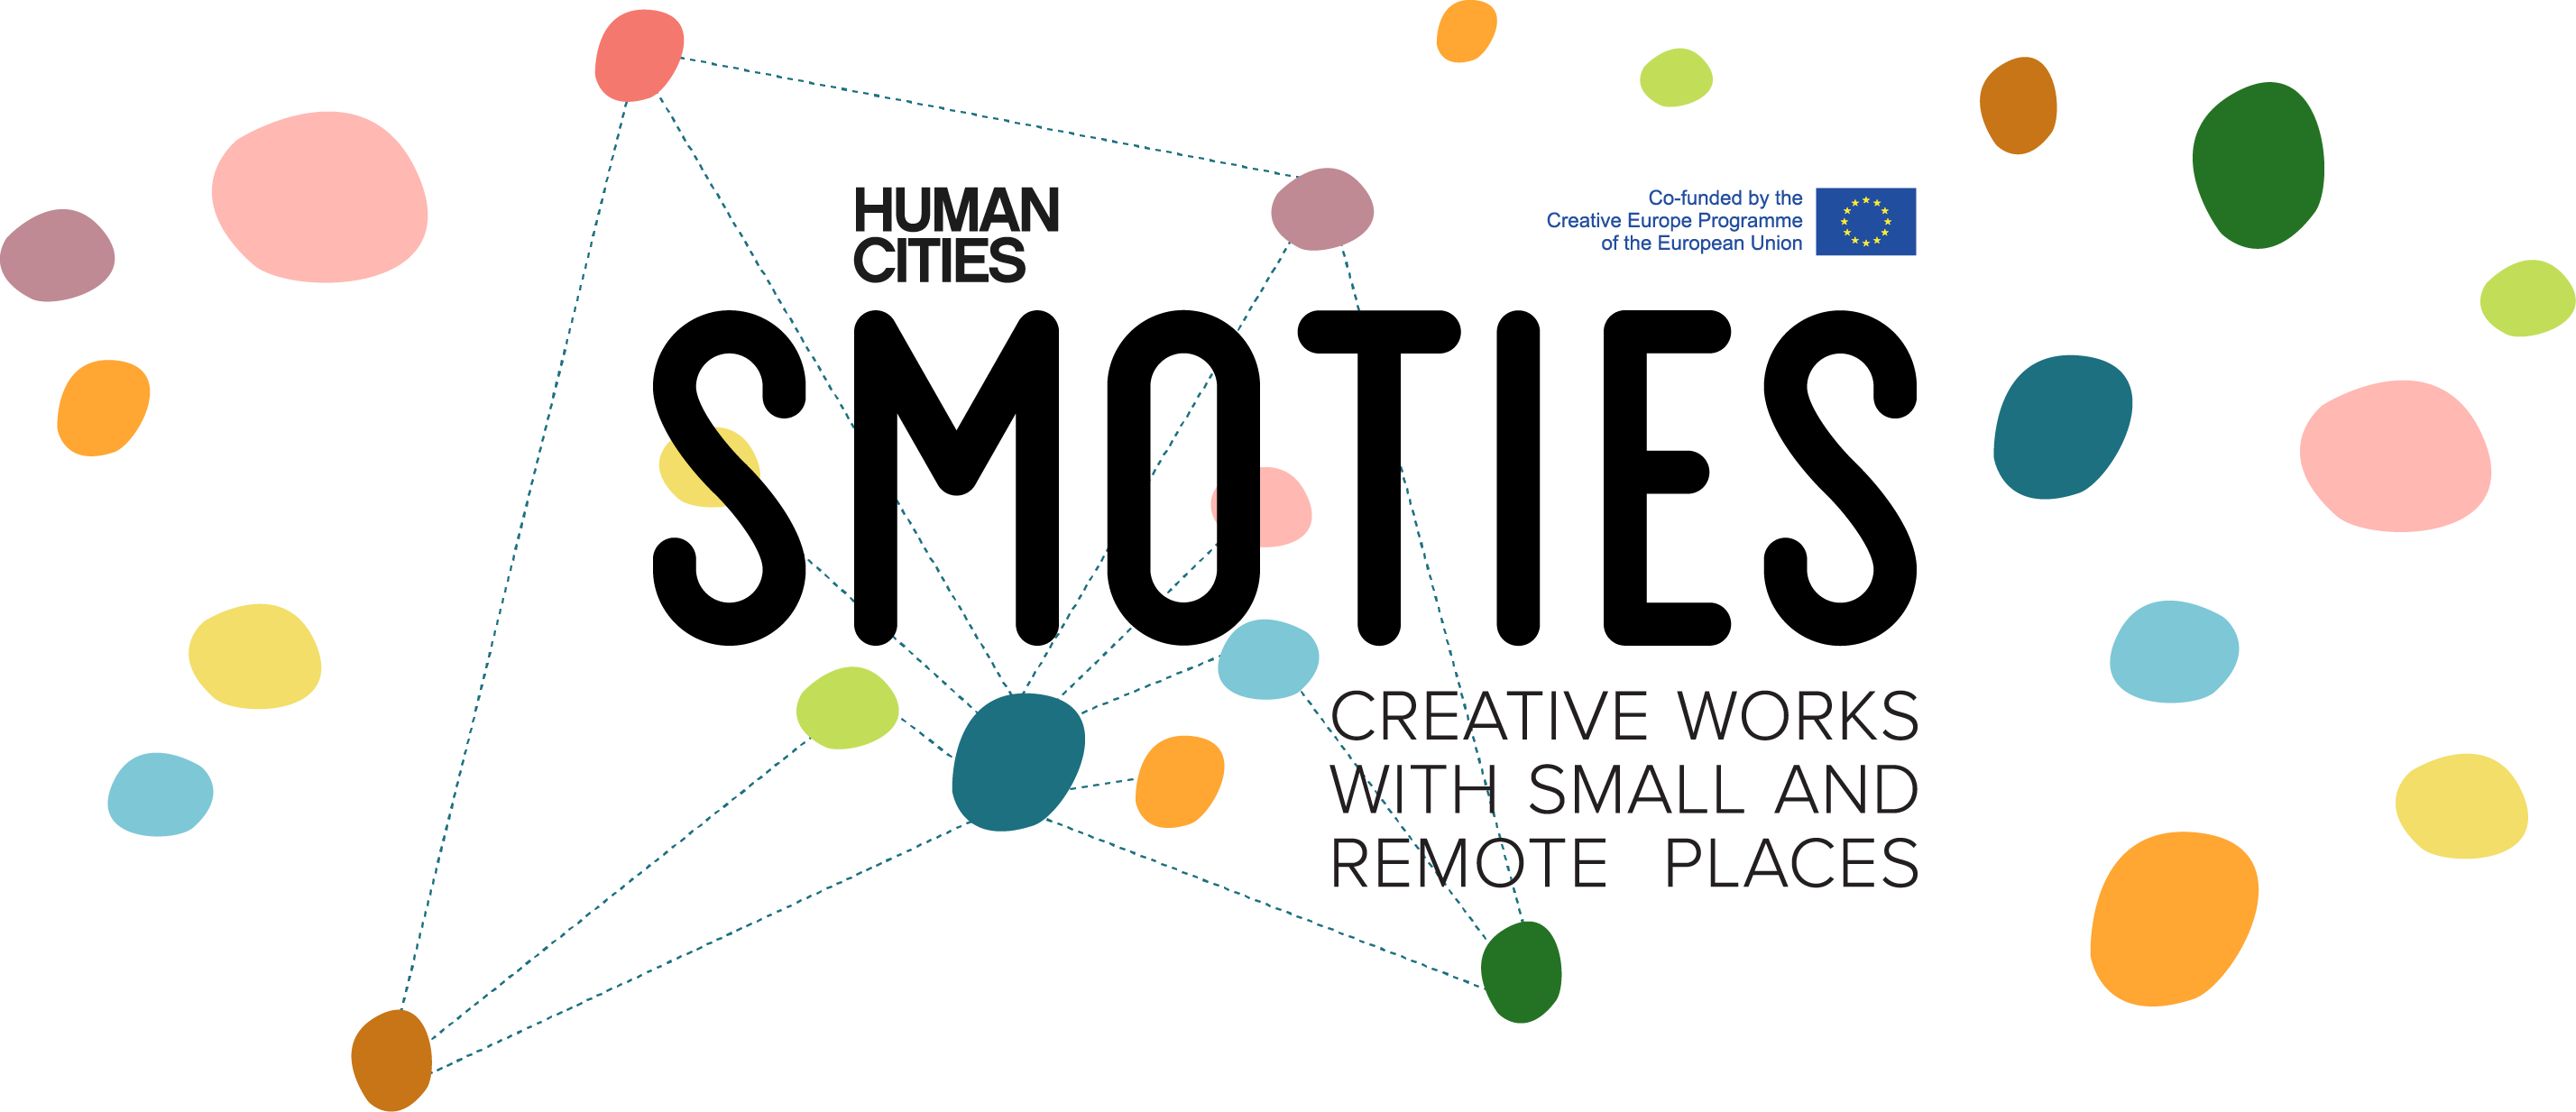 SMOTIES – Creative works with small and remote places